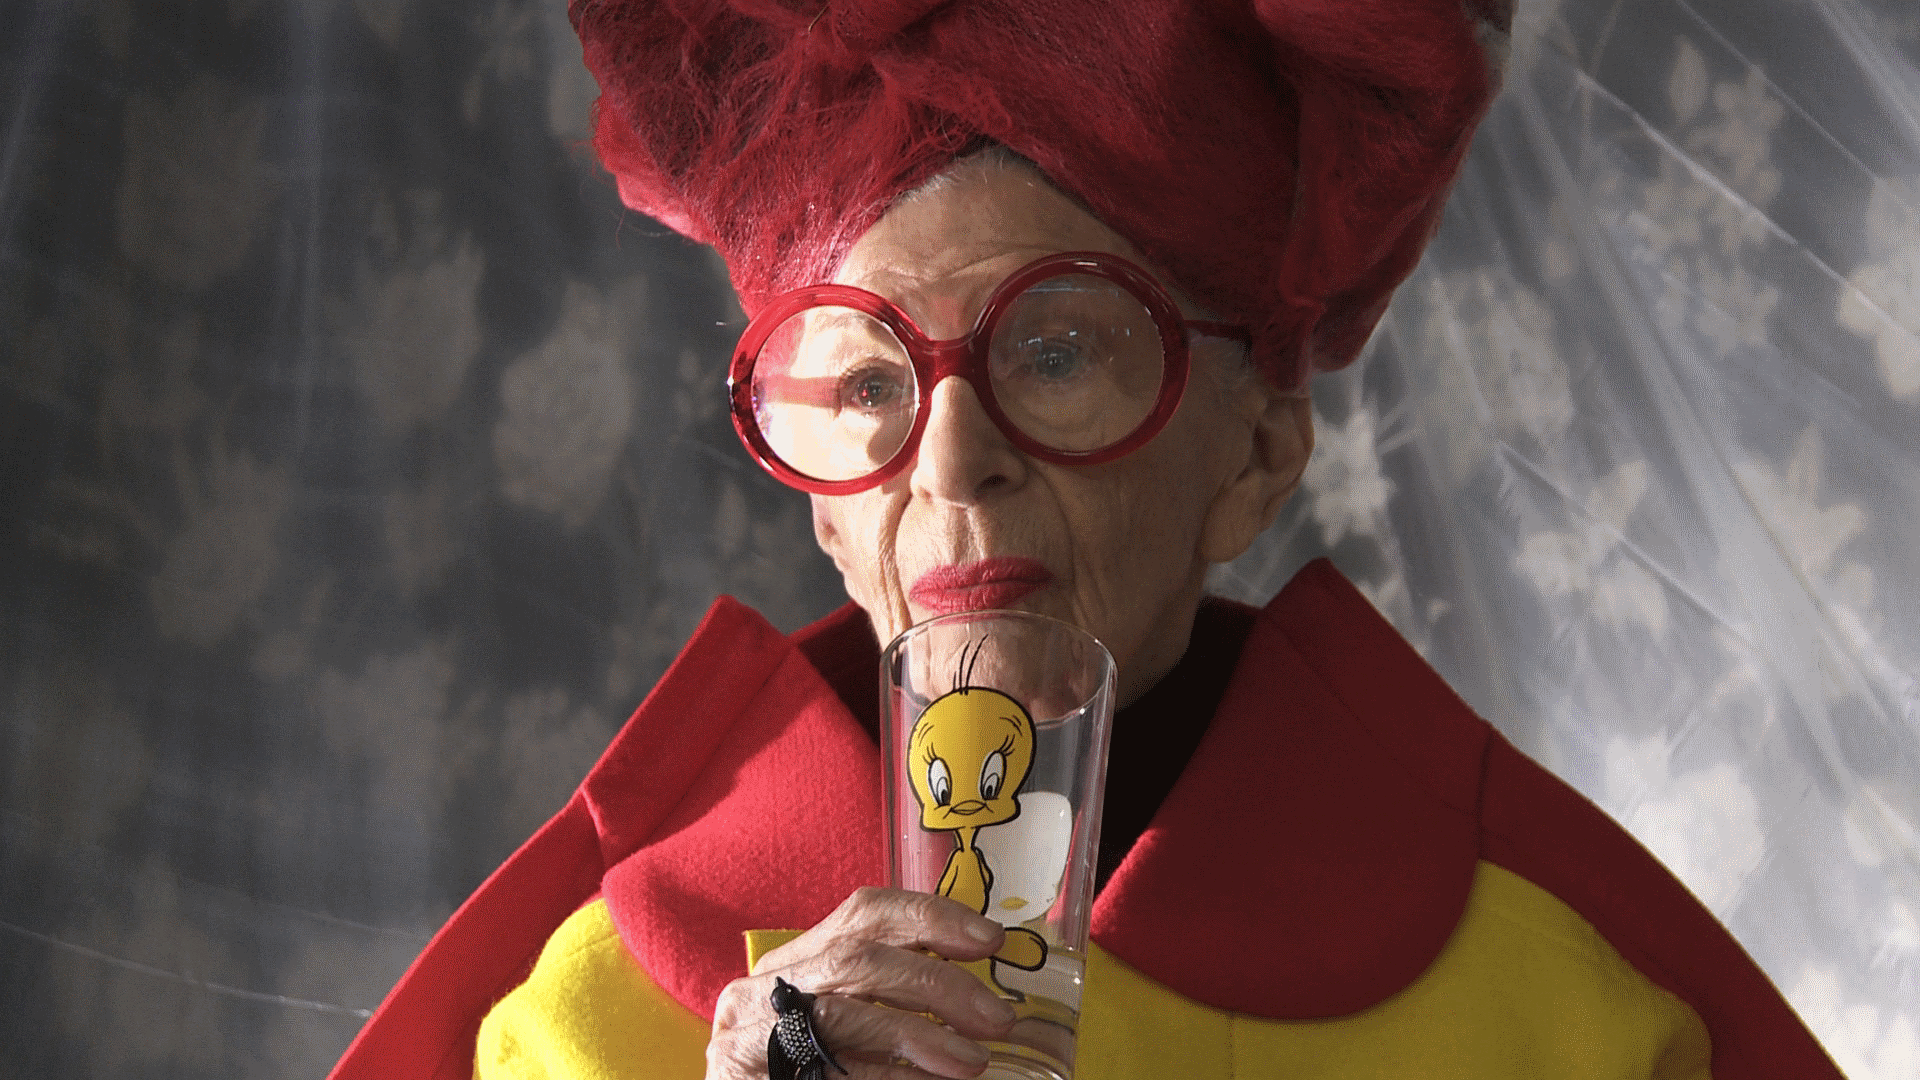 Iris Apfel sipping from tweety glass